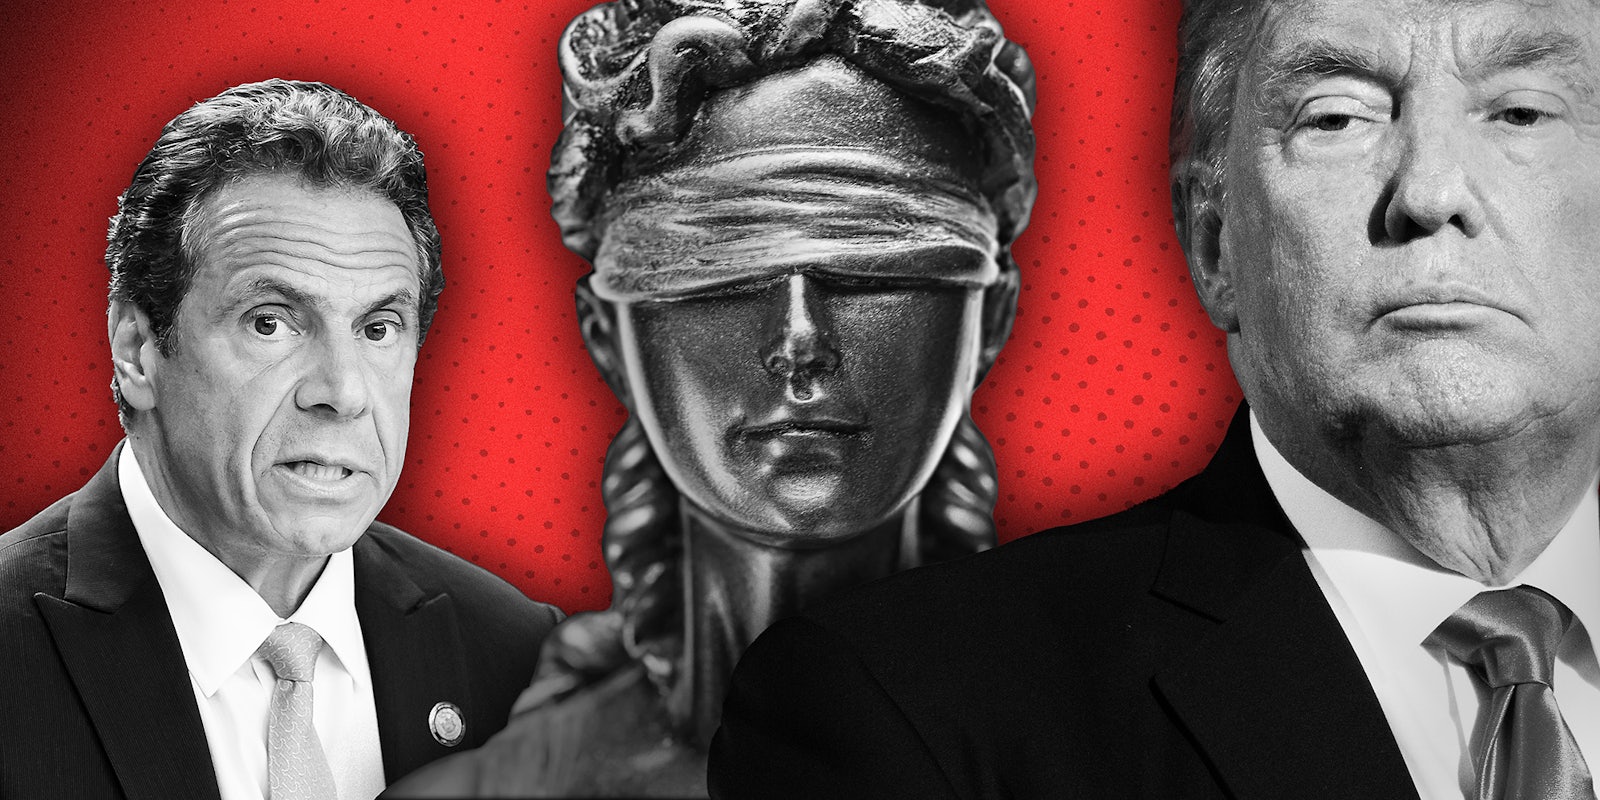 Illustration with Andrew Cuomo and Donald Trump with Lady Justice statue on a red background.